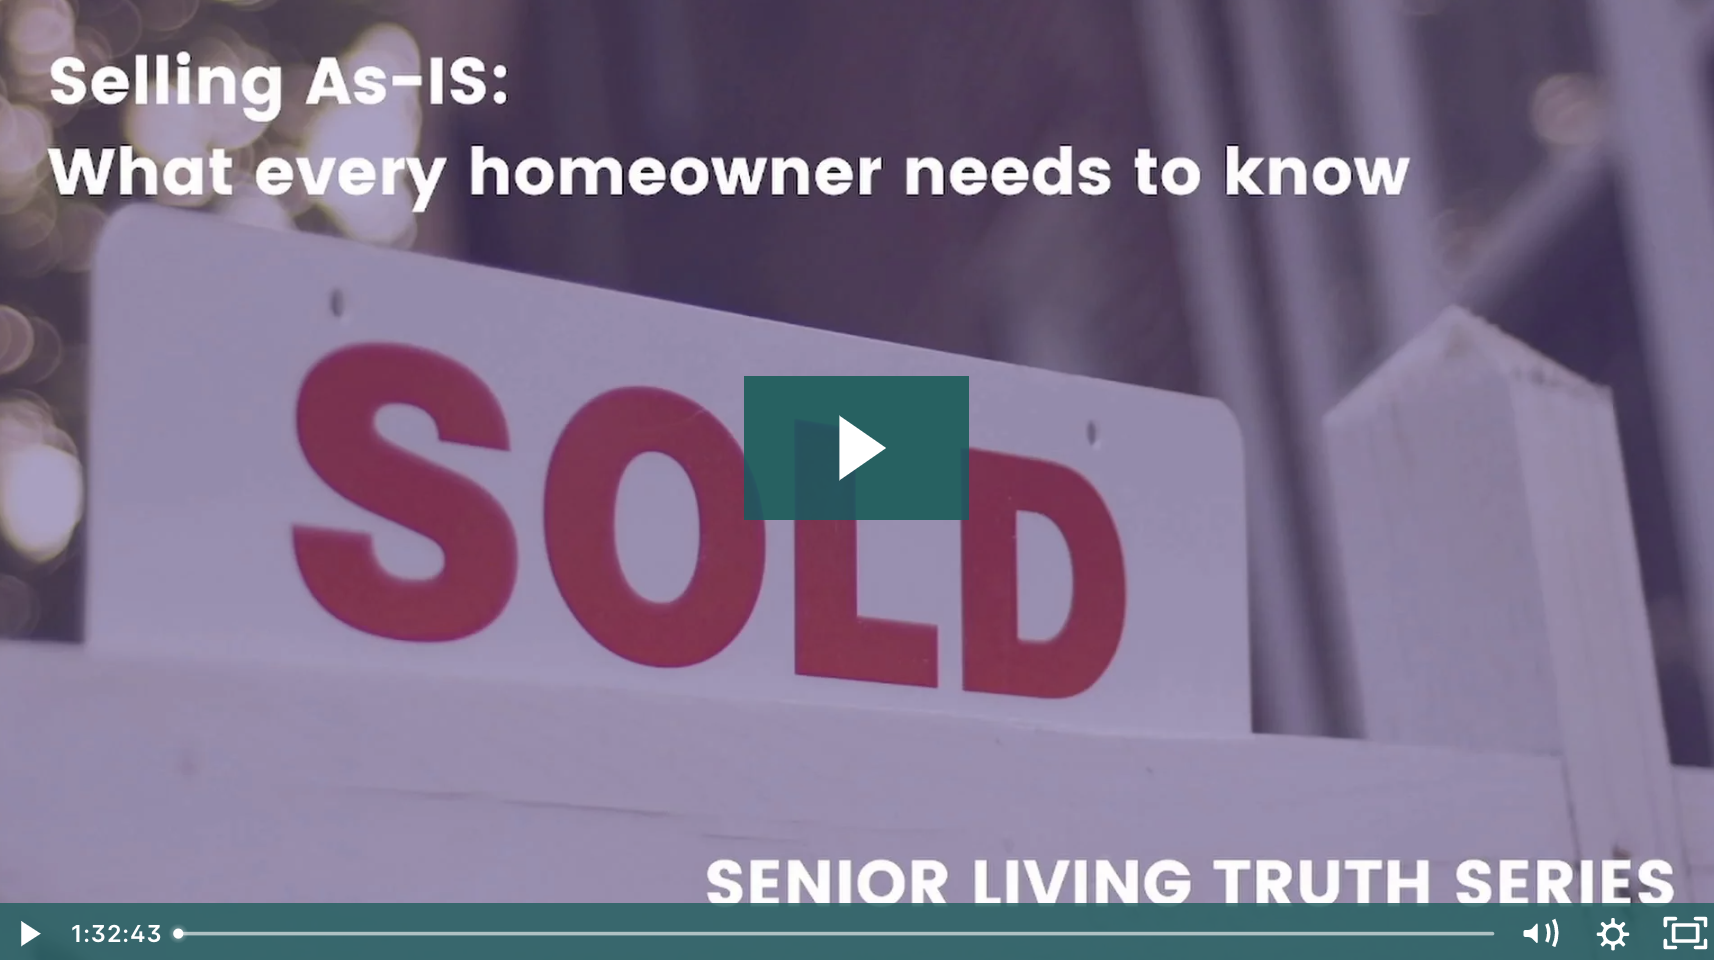 The Truth about Selling “As-is”: What every home seller should know